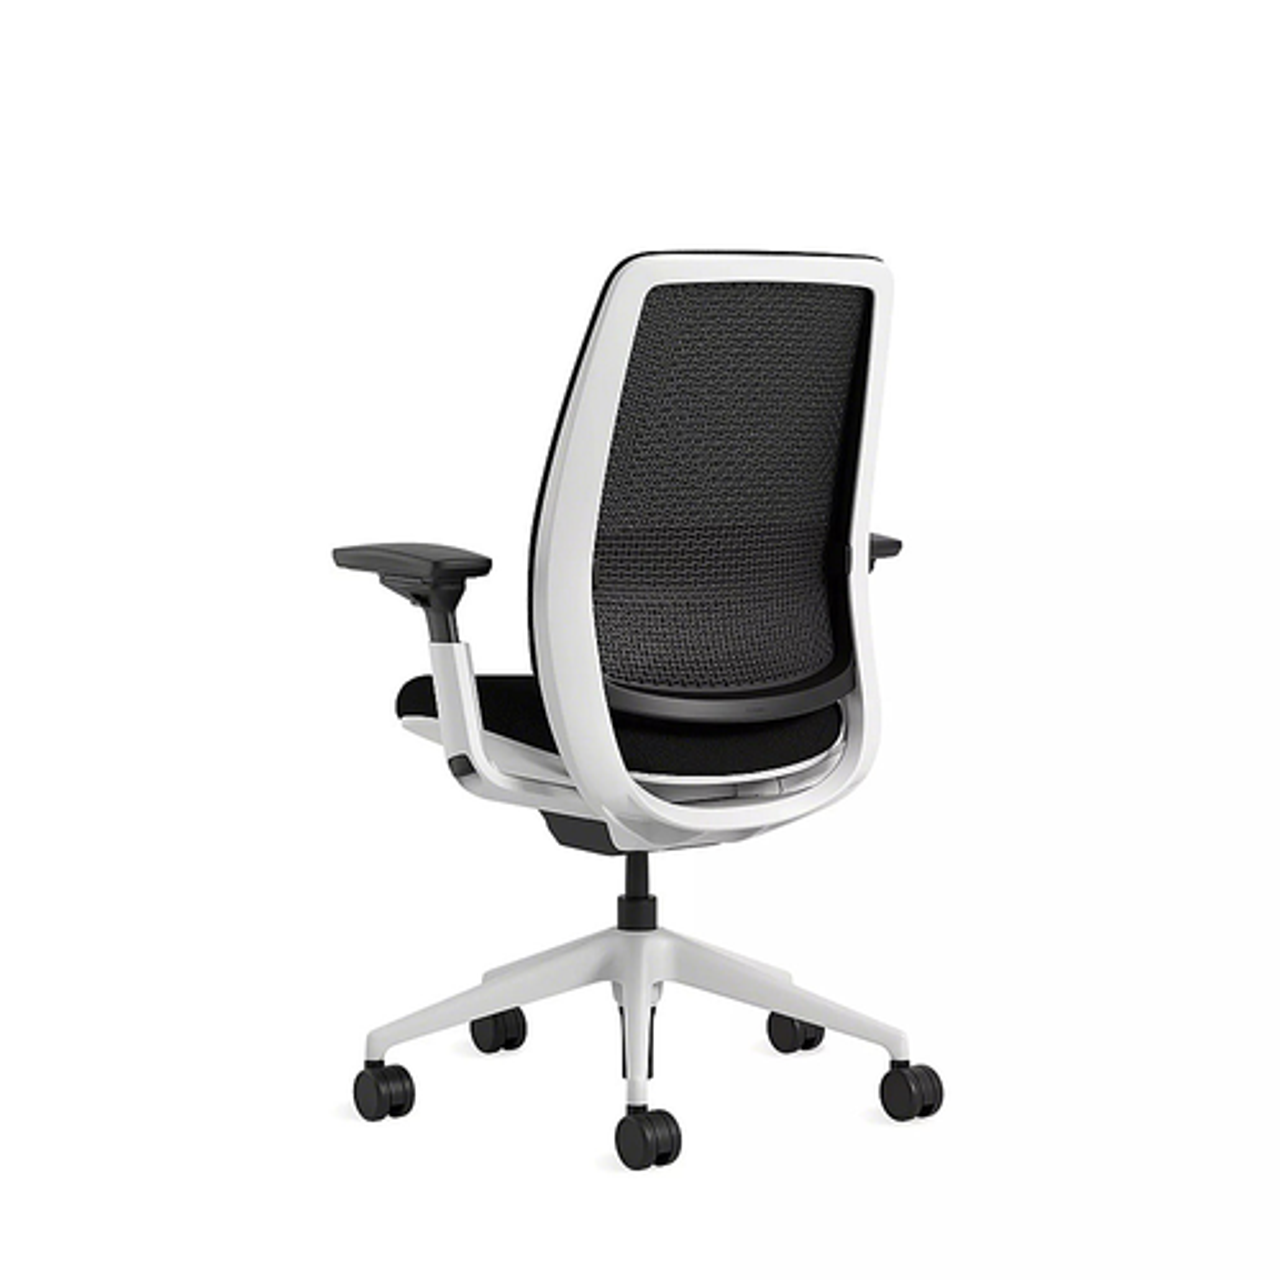 Steelcase Series 2 3D Airback Chair with Seagull Frame in Onyx Fabric and Licorice Mesh with Carpet Casters